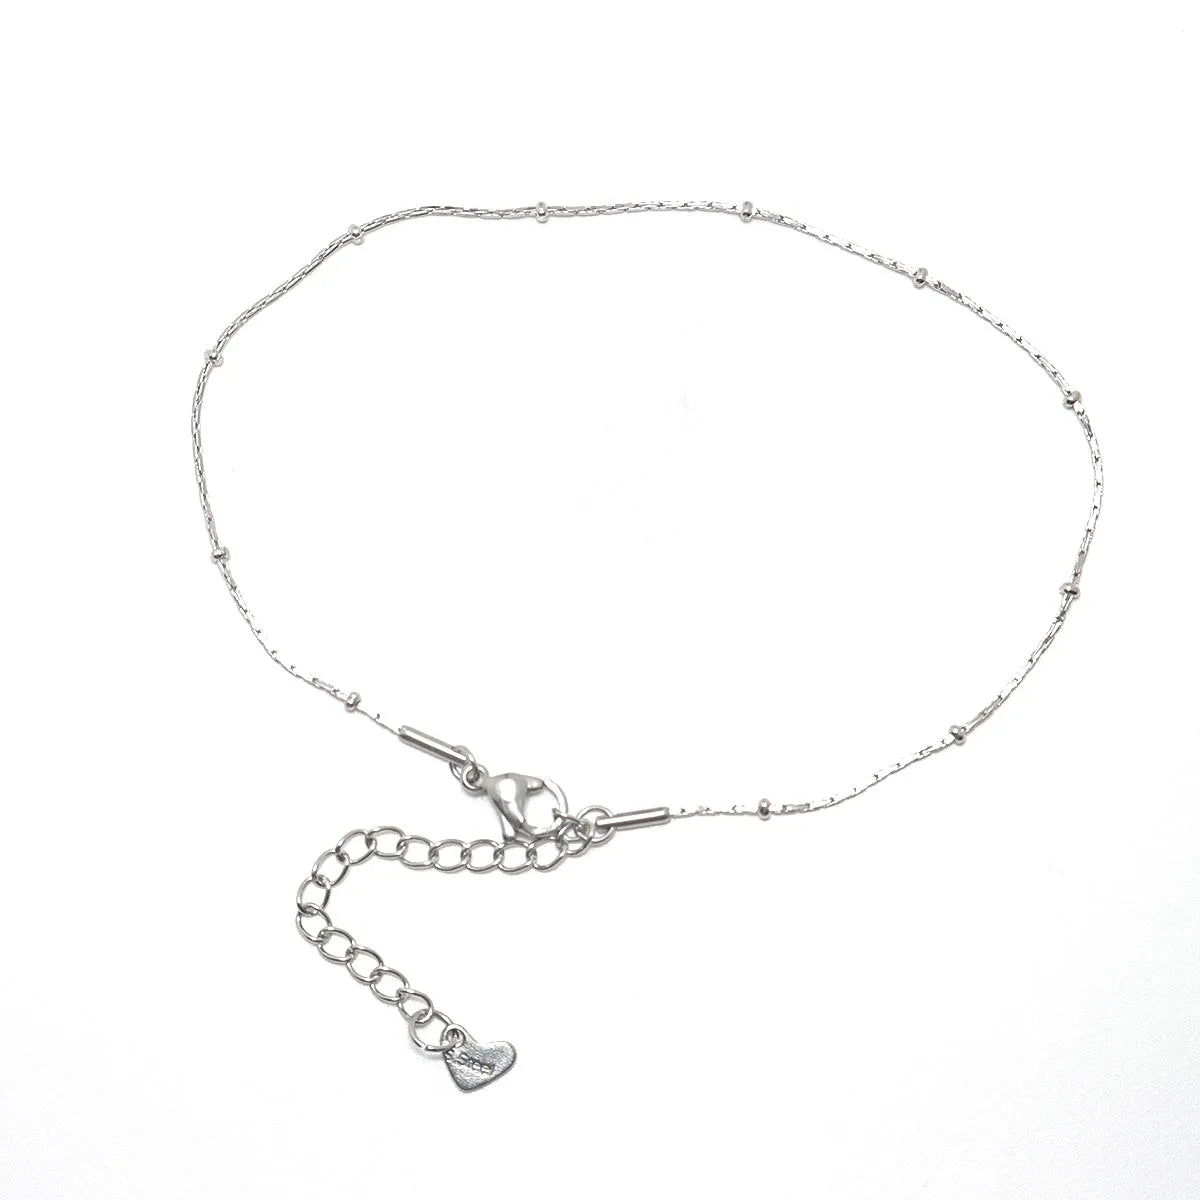 1PC 304 Stainless Steel Round Heart Chain Anklet Silver Color Simple Anklet For Women Summer Beach Foot Jewelry Gift 23.5cm Long